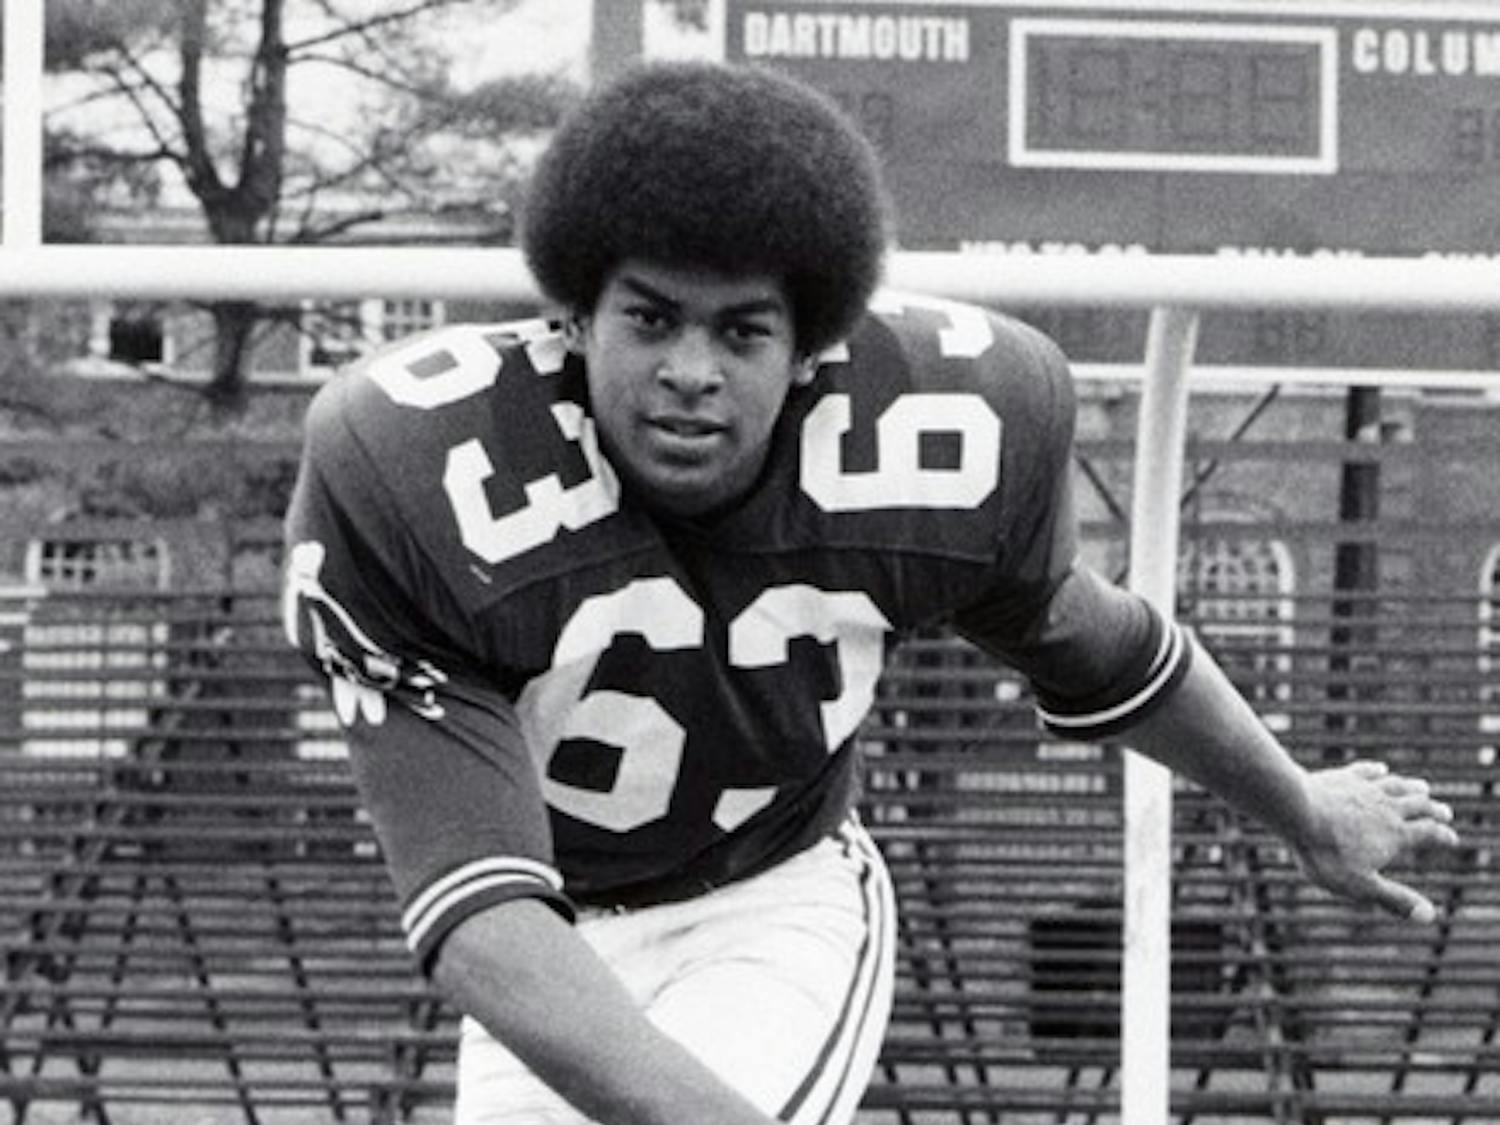 Reggie Wiliams '76 was inducted into the College Football Hall of Fame.